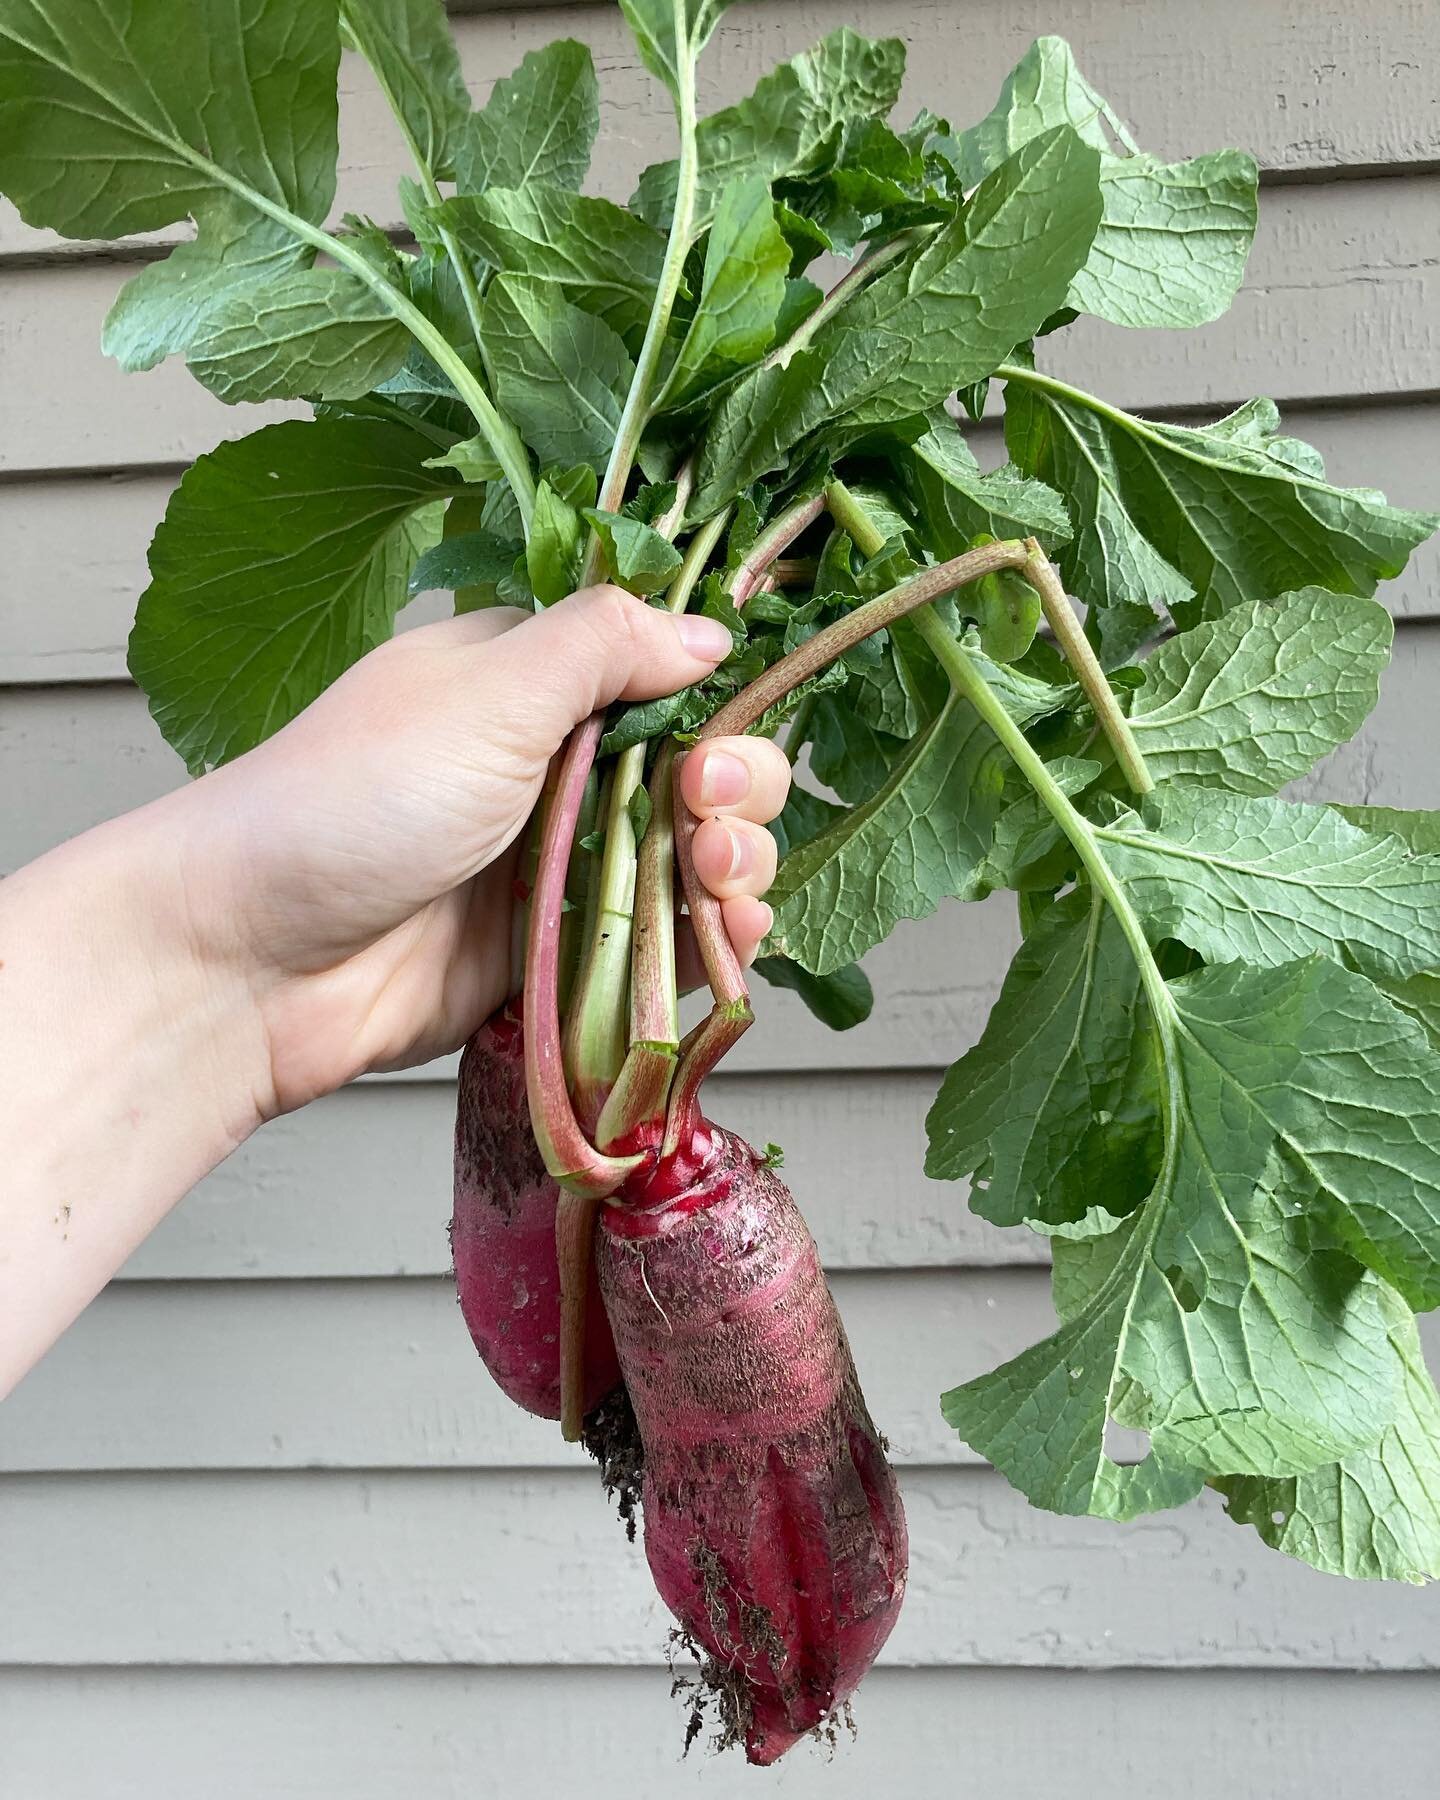 Beautiful fall beets fresh from the garden! Beets are my favorite cool-weather crop; they&rsquo;re delicious, versatile, and are full of vitamins, minerals, antioxidants &amp; fiber. They reduce inflammation, increase energy, assist with digestive he